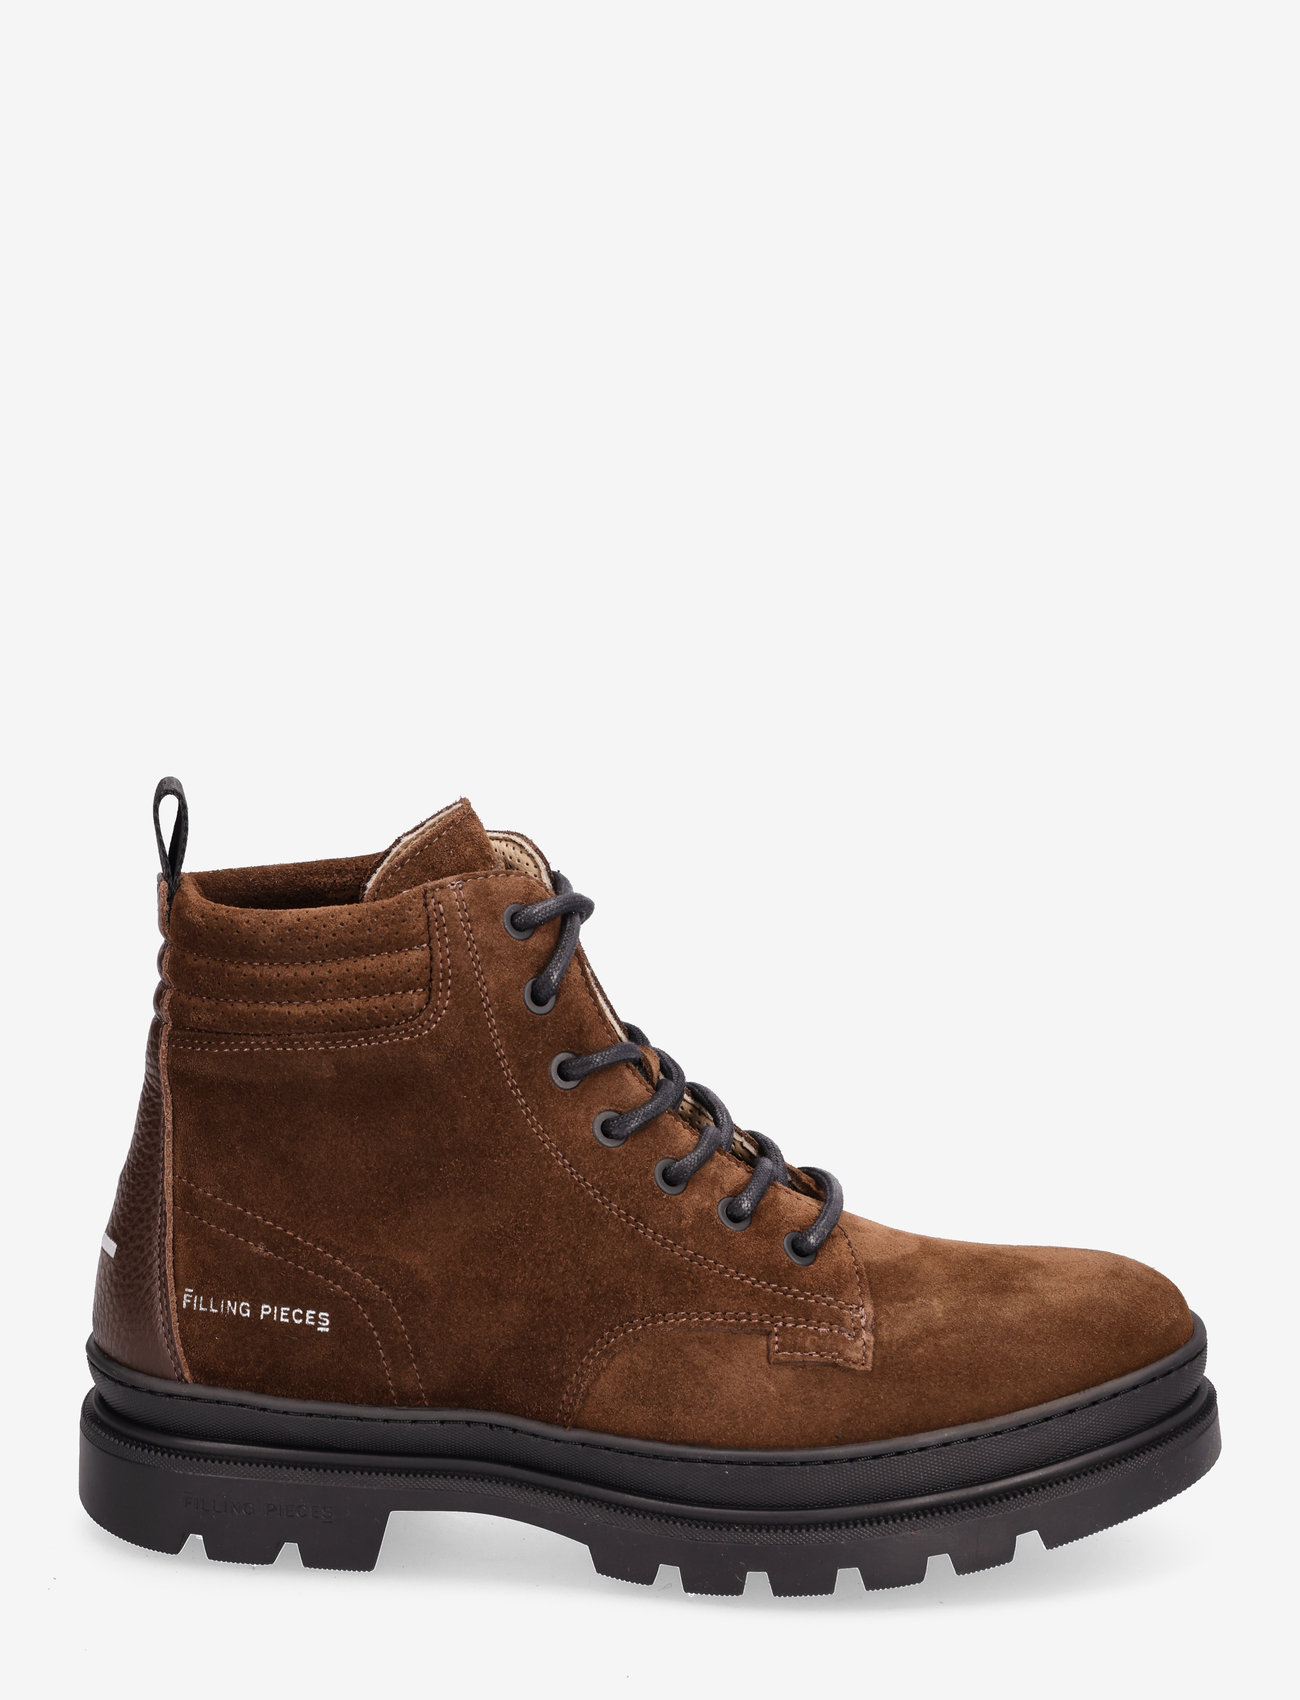 Filling Pieces - Josh Boot Black - lace ups - brown - 1